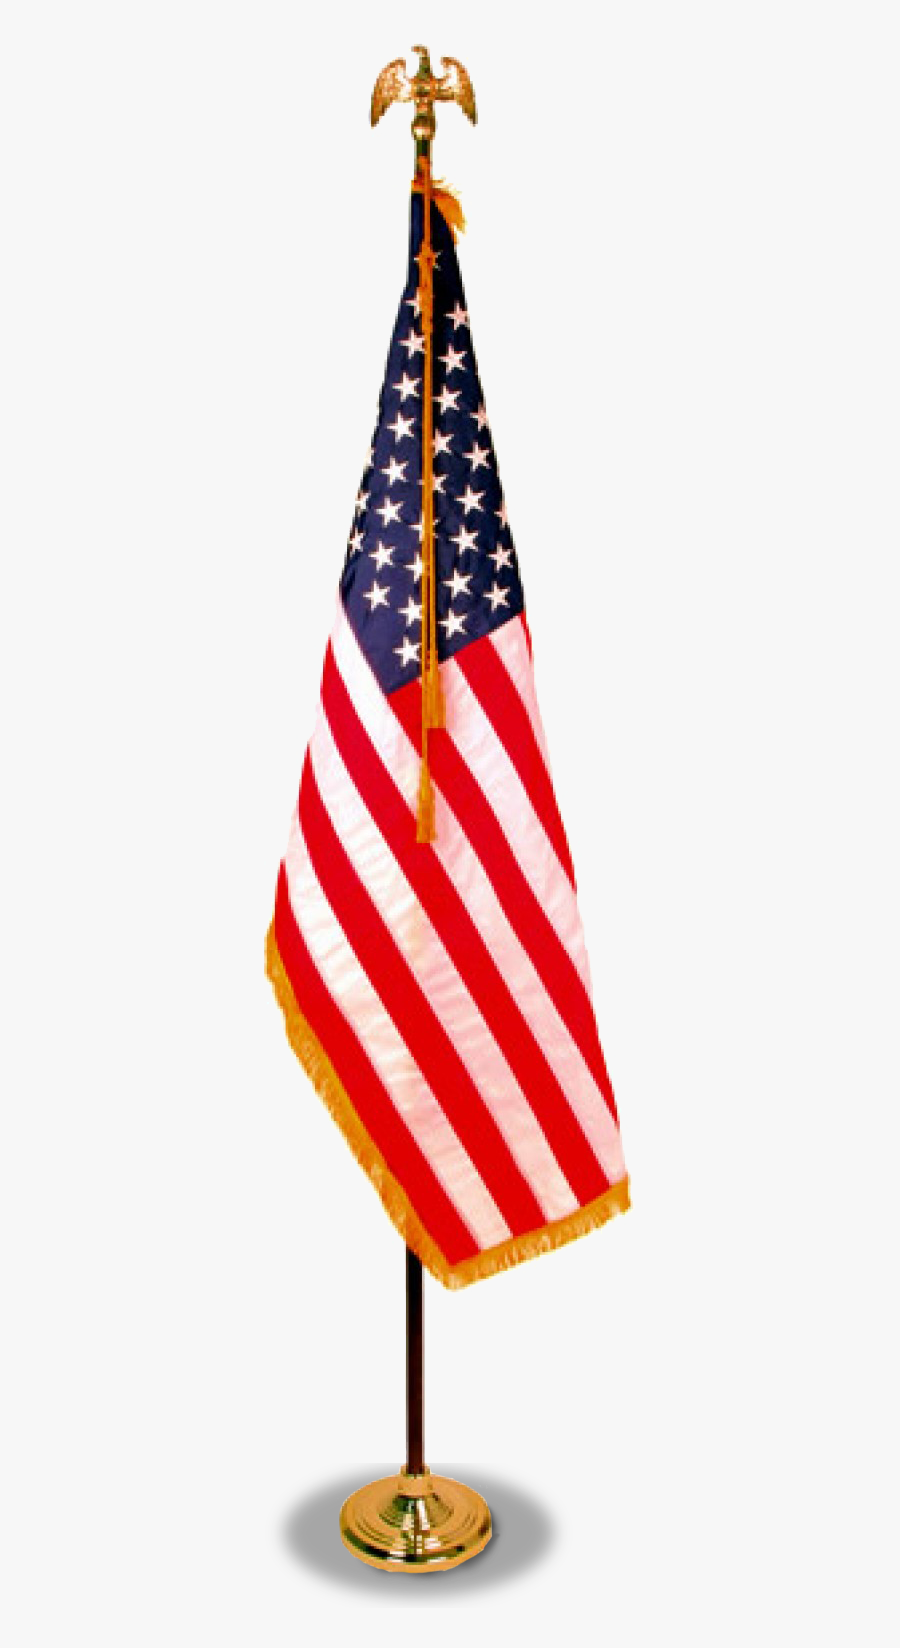 Transparent Flagpole Pulley Clipart - American Flag On Pole Png, Transparent Clipart